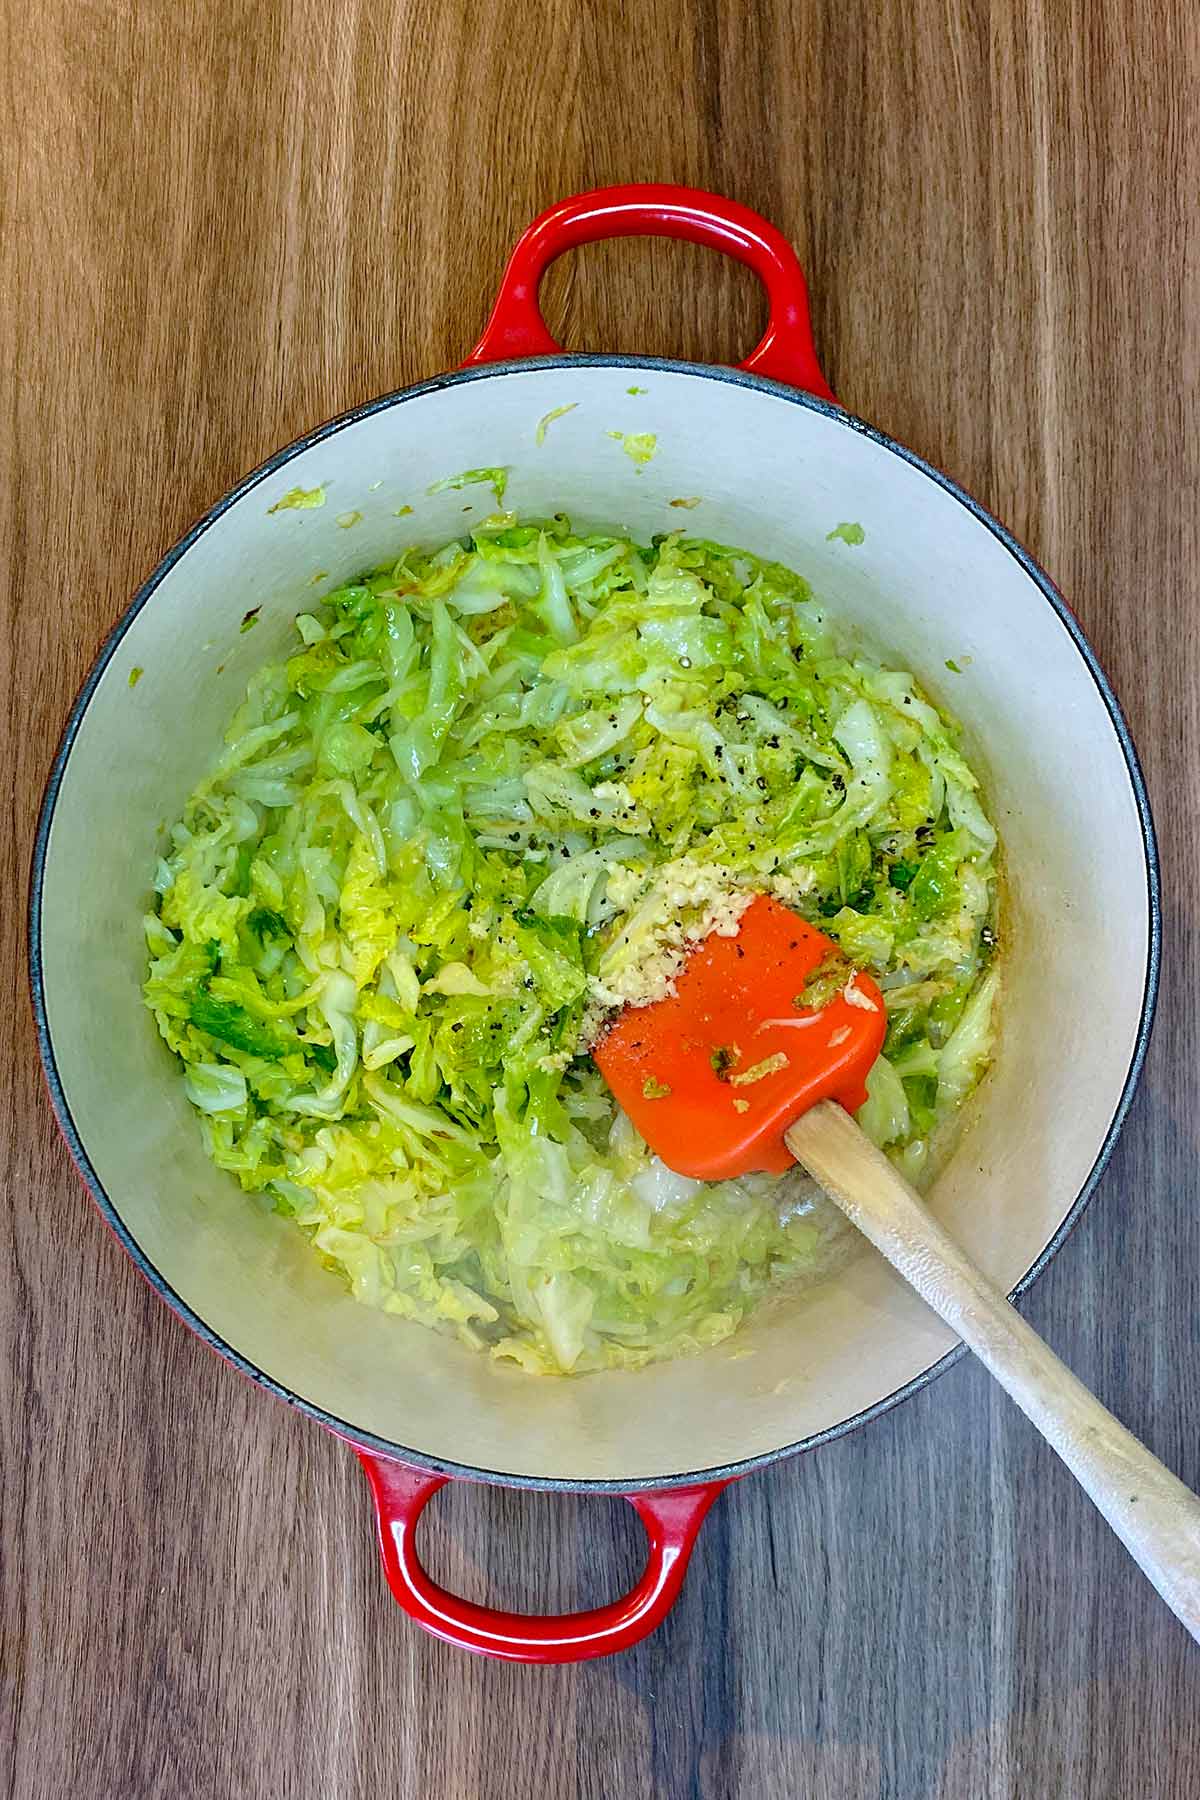 Garlic, salt and pepper and vinegar added to the cooked cabbage.